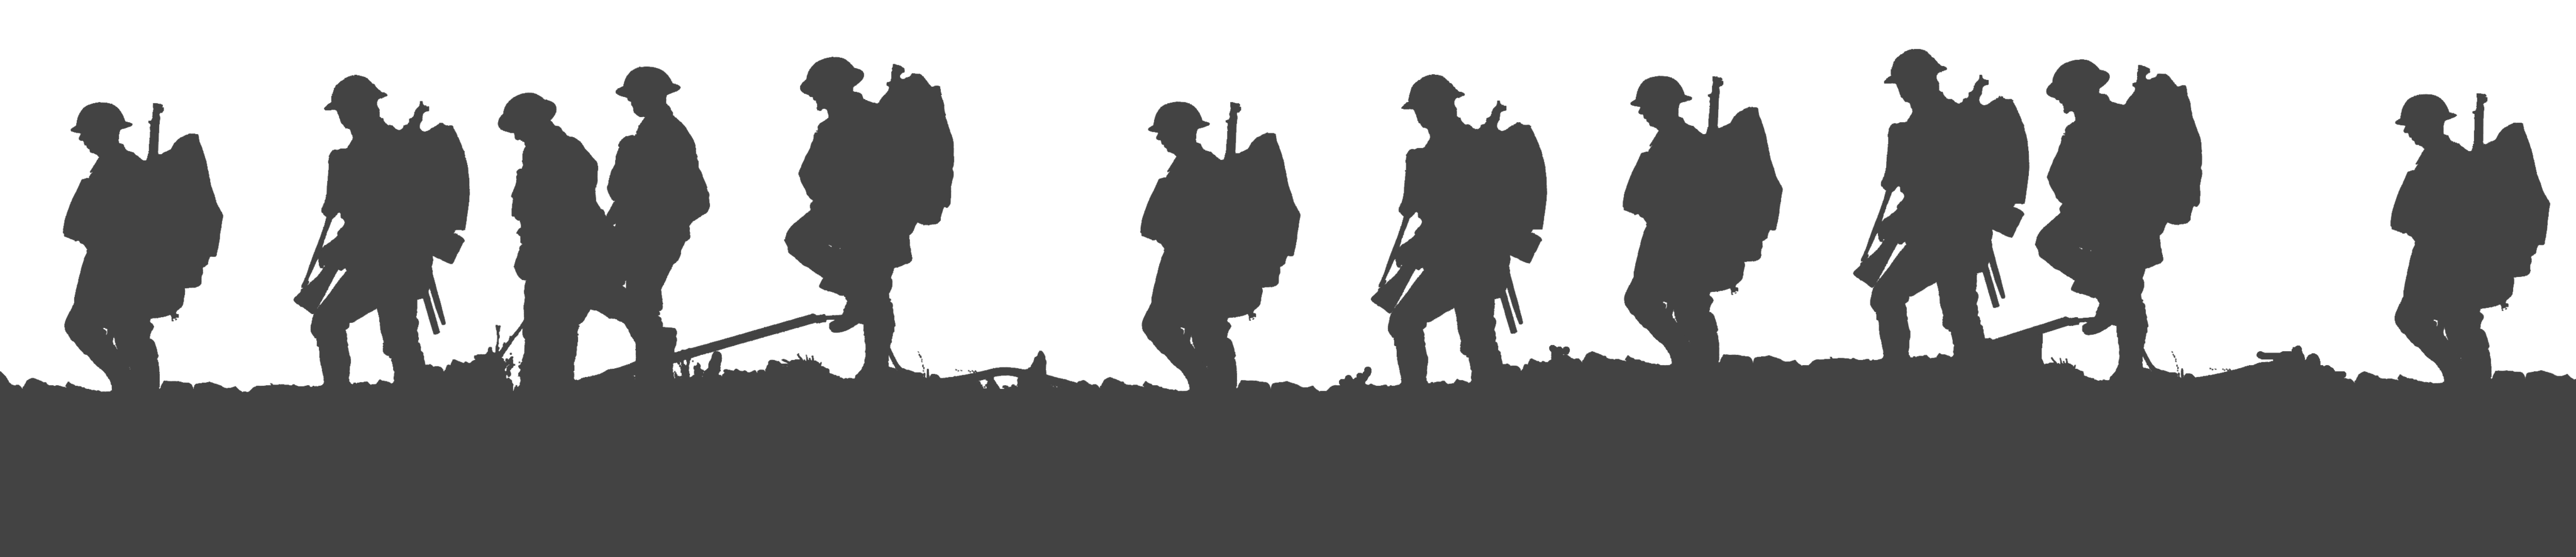 Lest we forget First World War Soldier Silhouette Military ... - Walking Soldier Silhouette